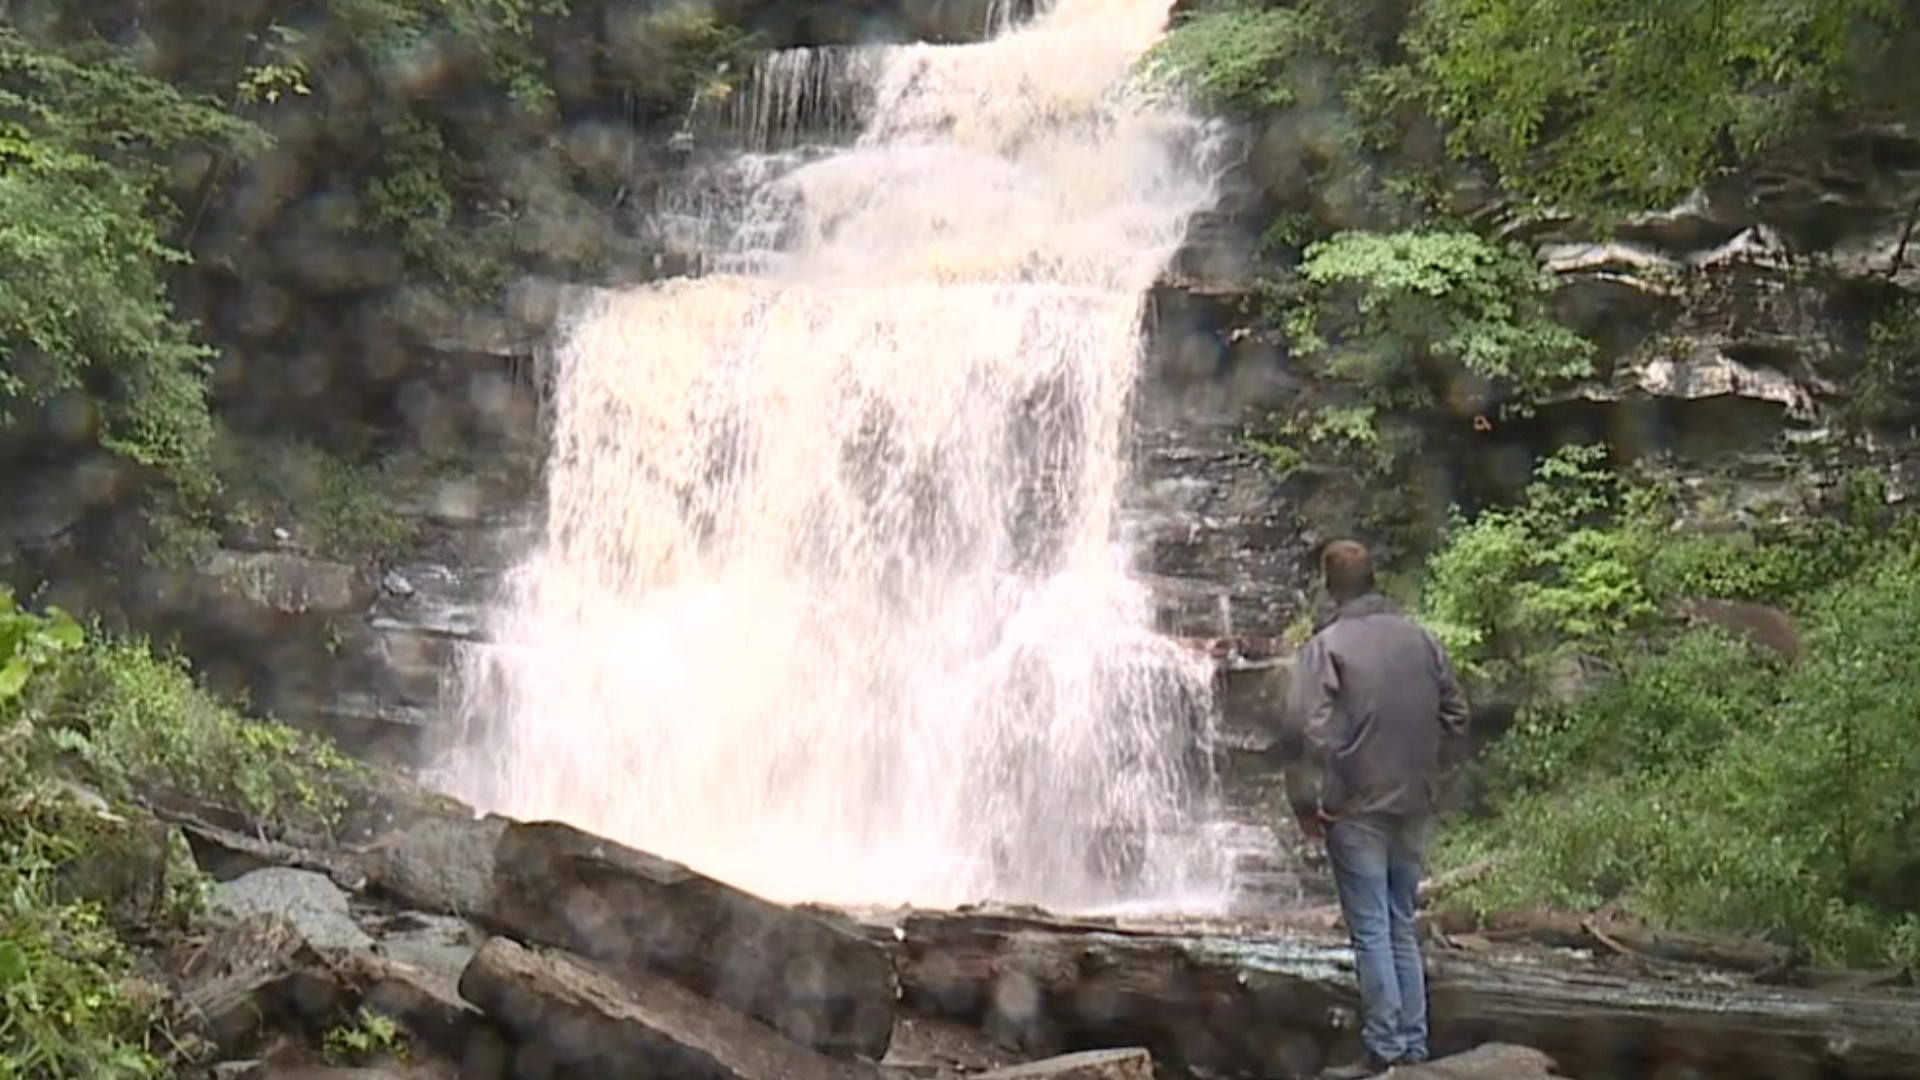 The water is back at Ricketts Glen's famous Falls Trail. Jon Meyer shows us the dramatic changes in only a few days.